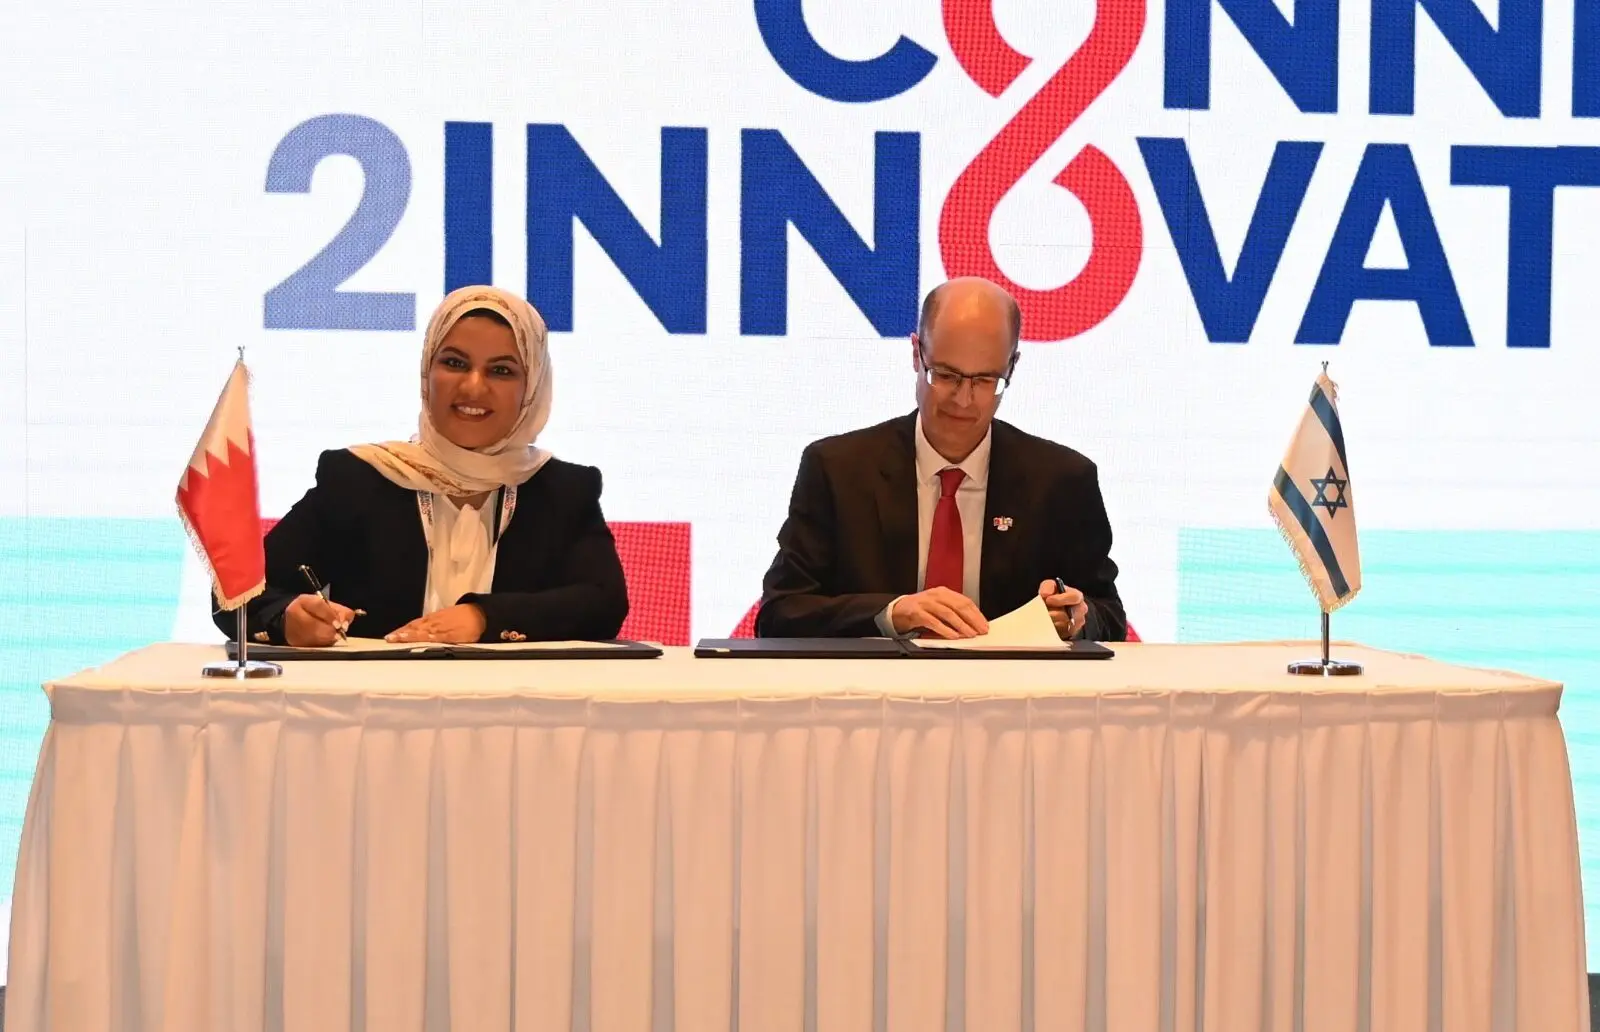 More Than 300 Bahraini & Israeli Business Leaders Attend “Connect2Innovate” Conference